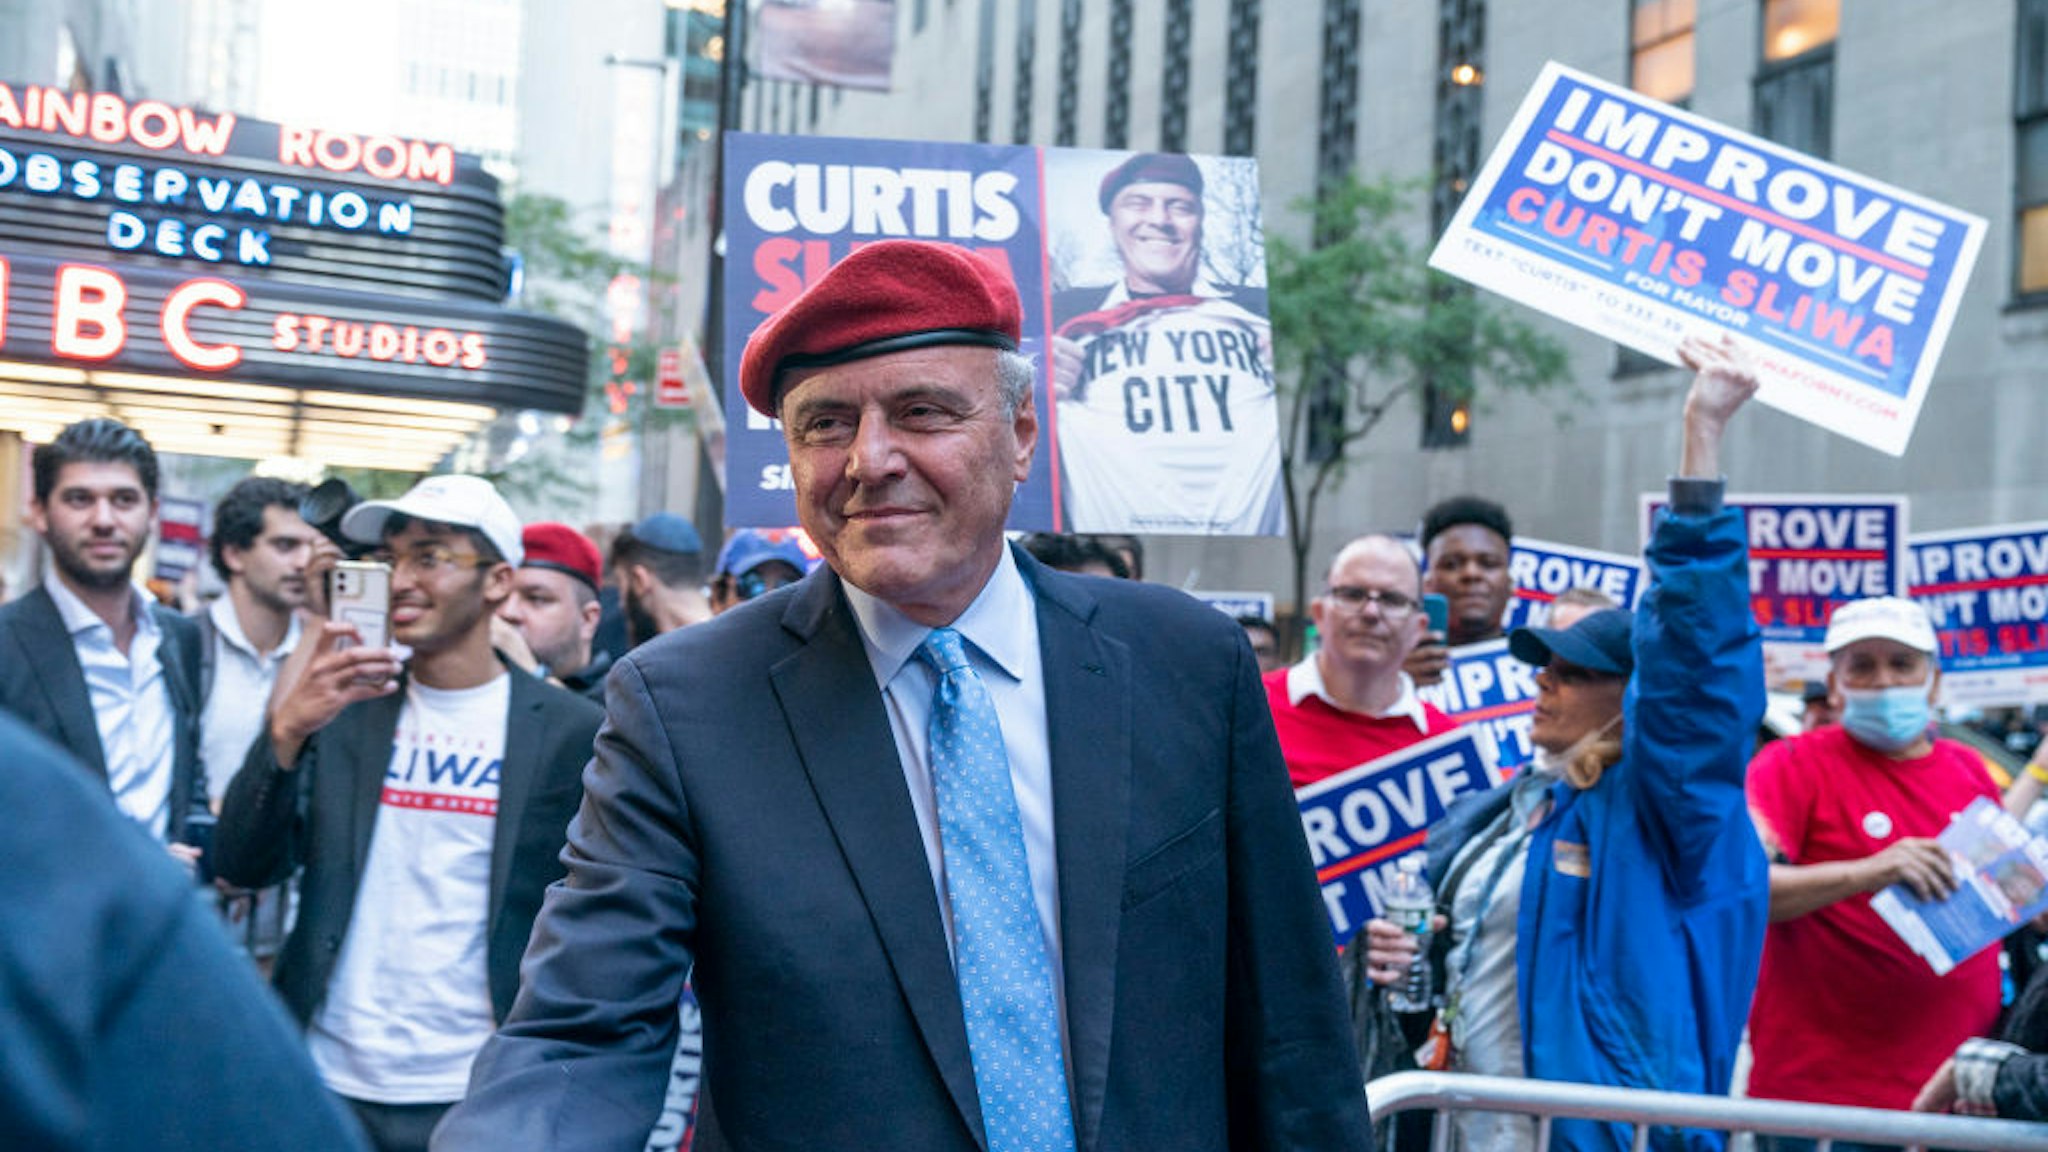 NEW YORK, UNITED STATES - 2021/10/20: Curtis Sliwa Republican Party mayoral candidate greets supporters outside of NBC Studios before first general election debates. (Photo by Lev Radin/Pacific Press/LightRocket via Getty Images)